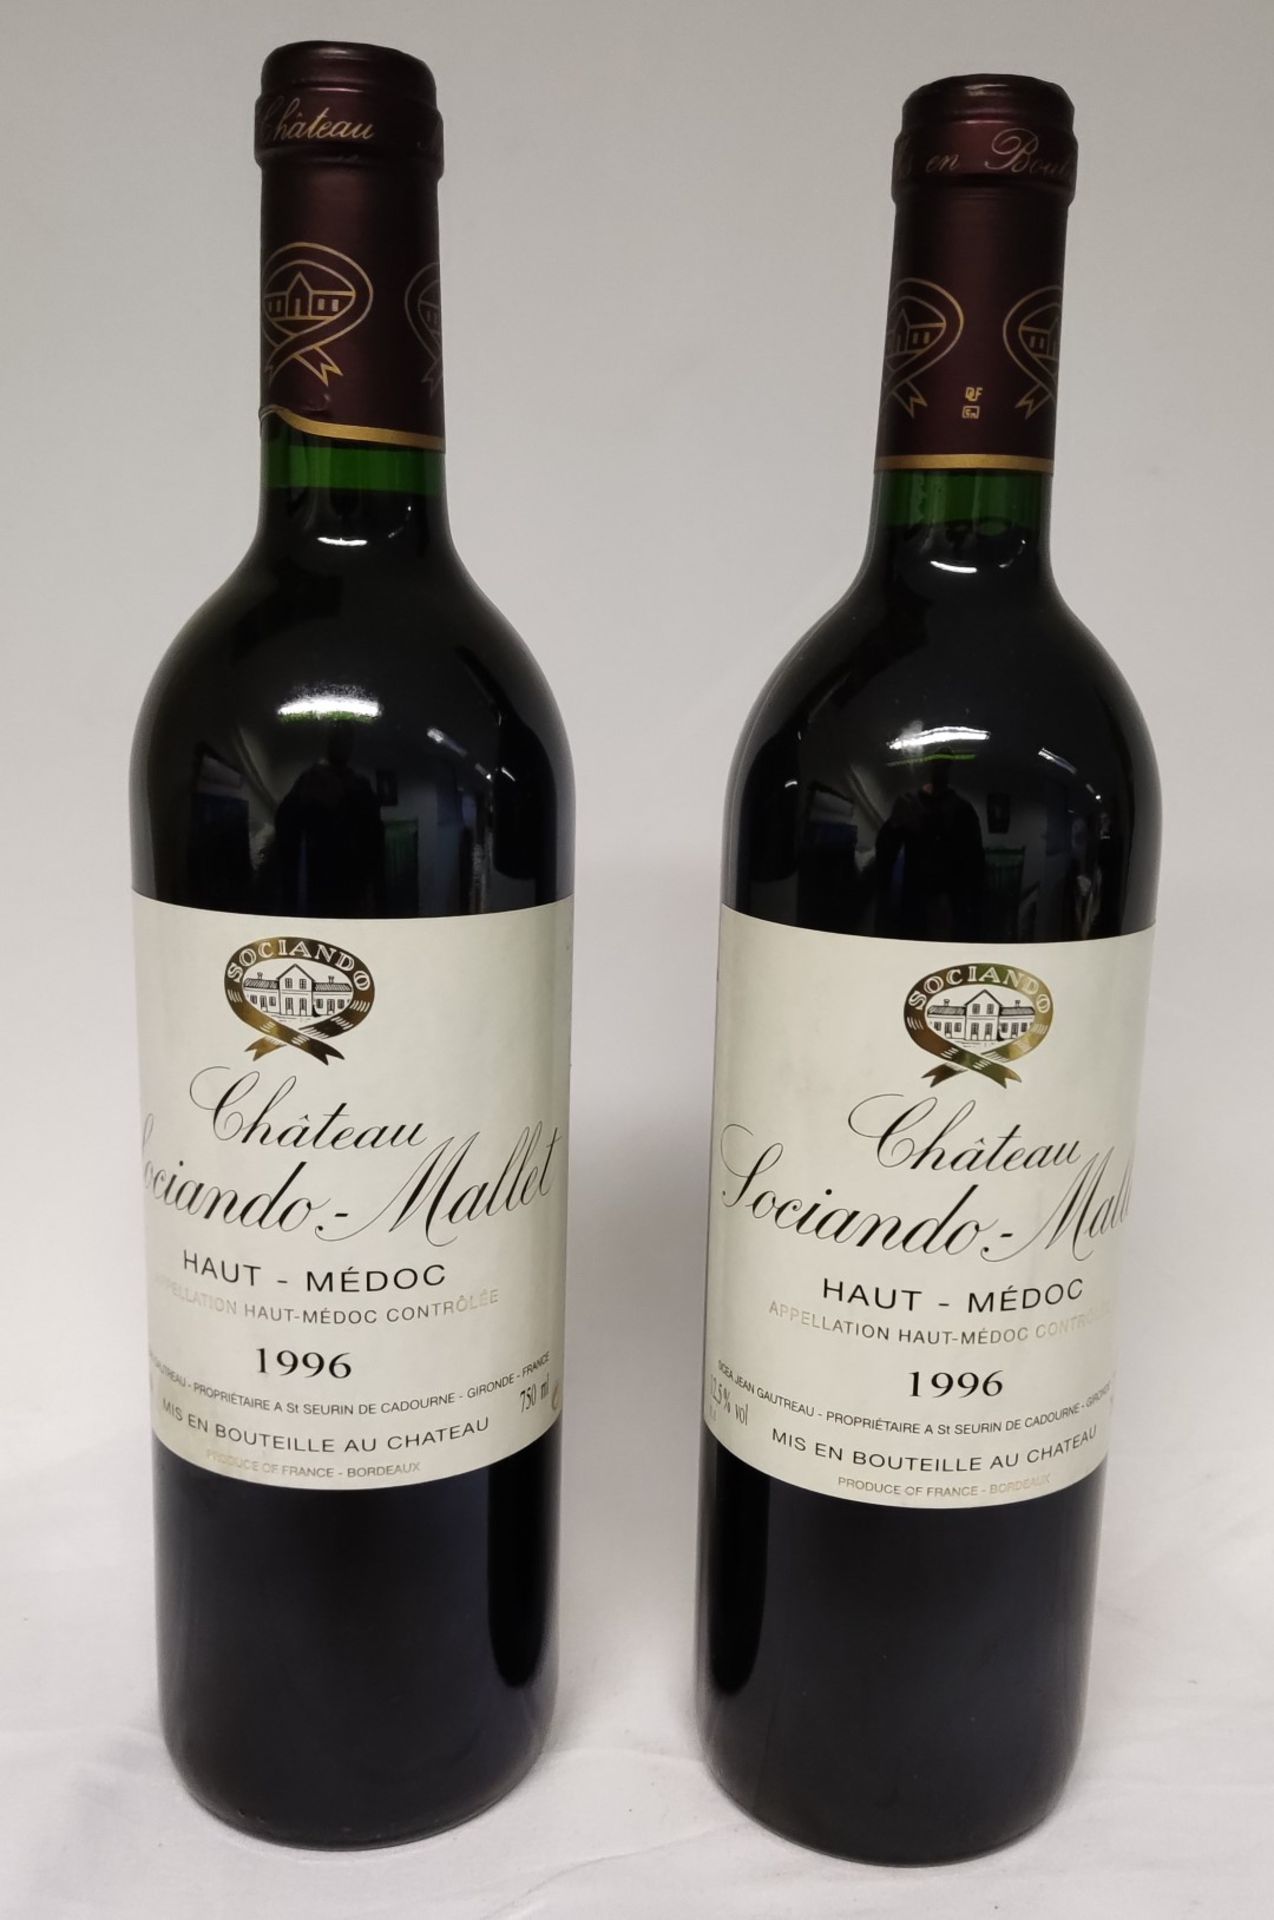 2 x Bottles of 1996 Chateau Sociando-Mallet, Haut-Medoc, France - Dry Red Wine - RRP £260 - Image 5 of 7